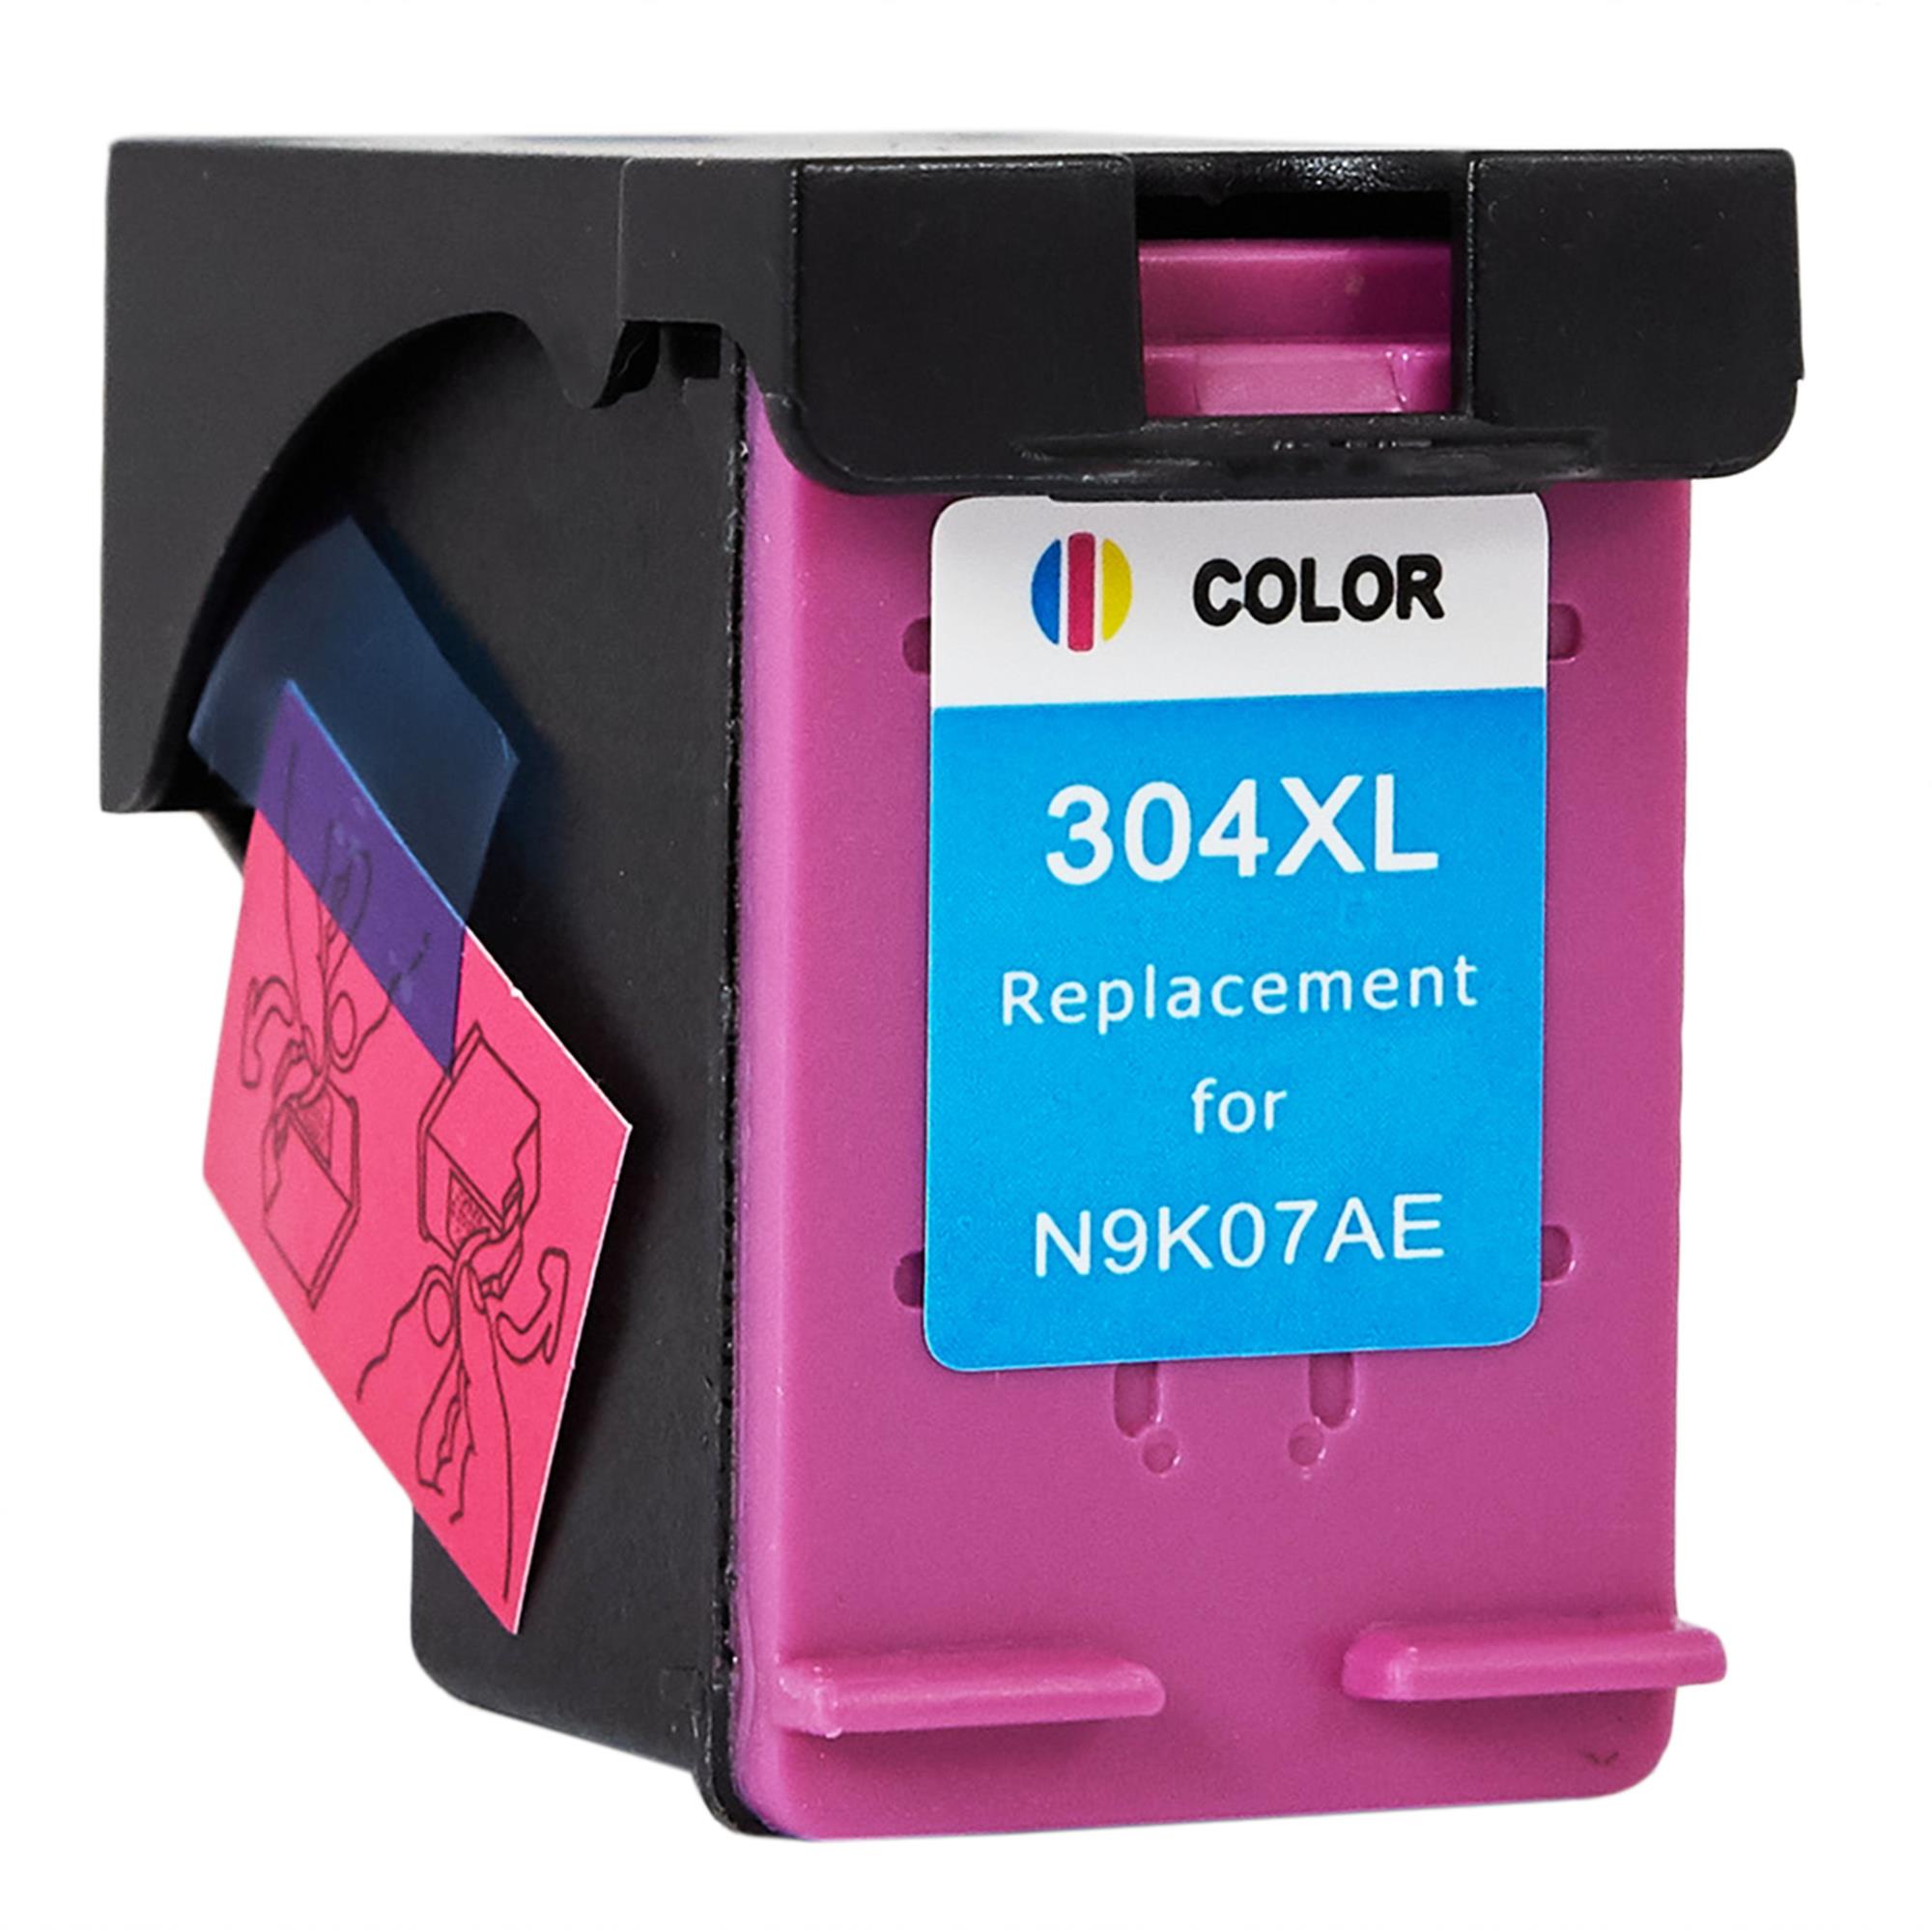 2 x HP 304 XL Remanufactured Ink Cartridge - High Capacity Tri-Colour Ink  Cartridge - Compatible For (N9K07AE, HP 304XL) - Best Office Supplies Ltd